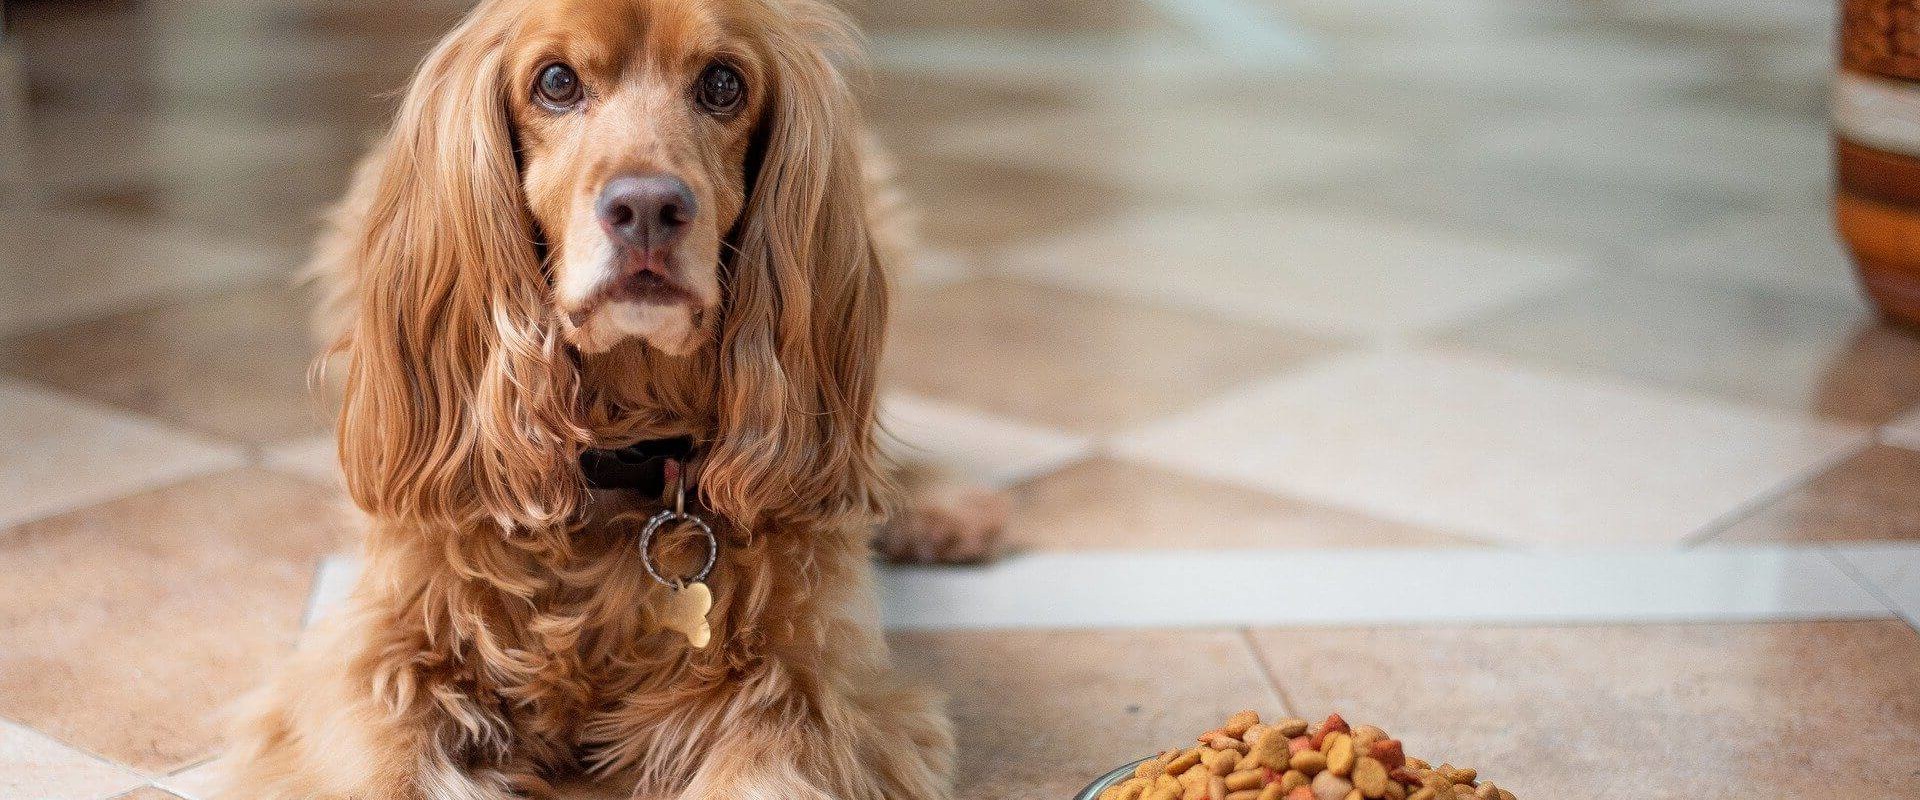 What dog food brands are killing dogs?